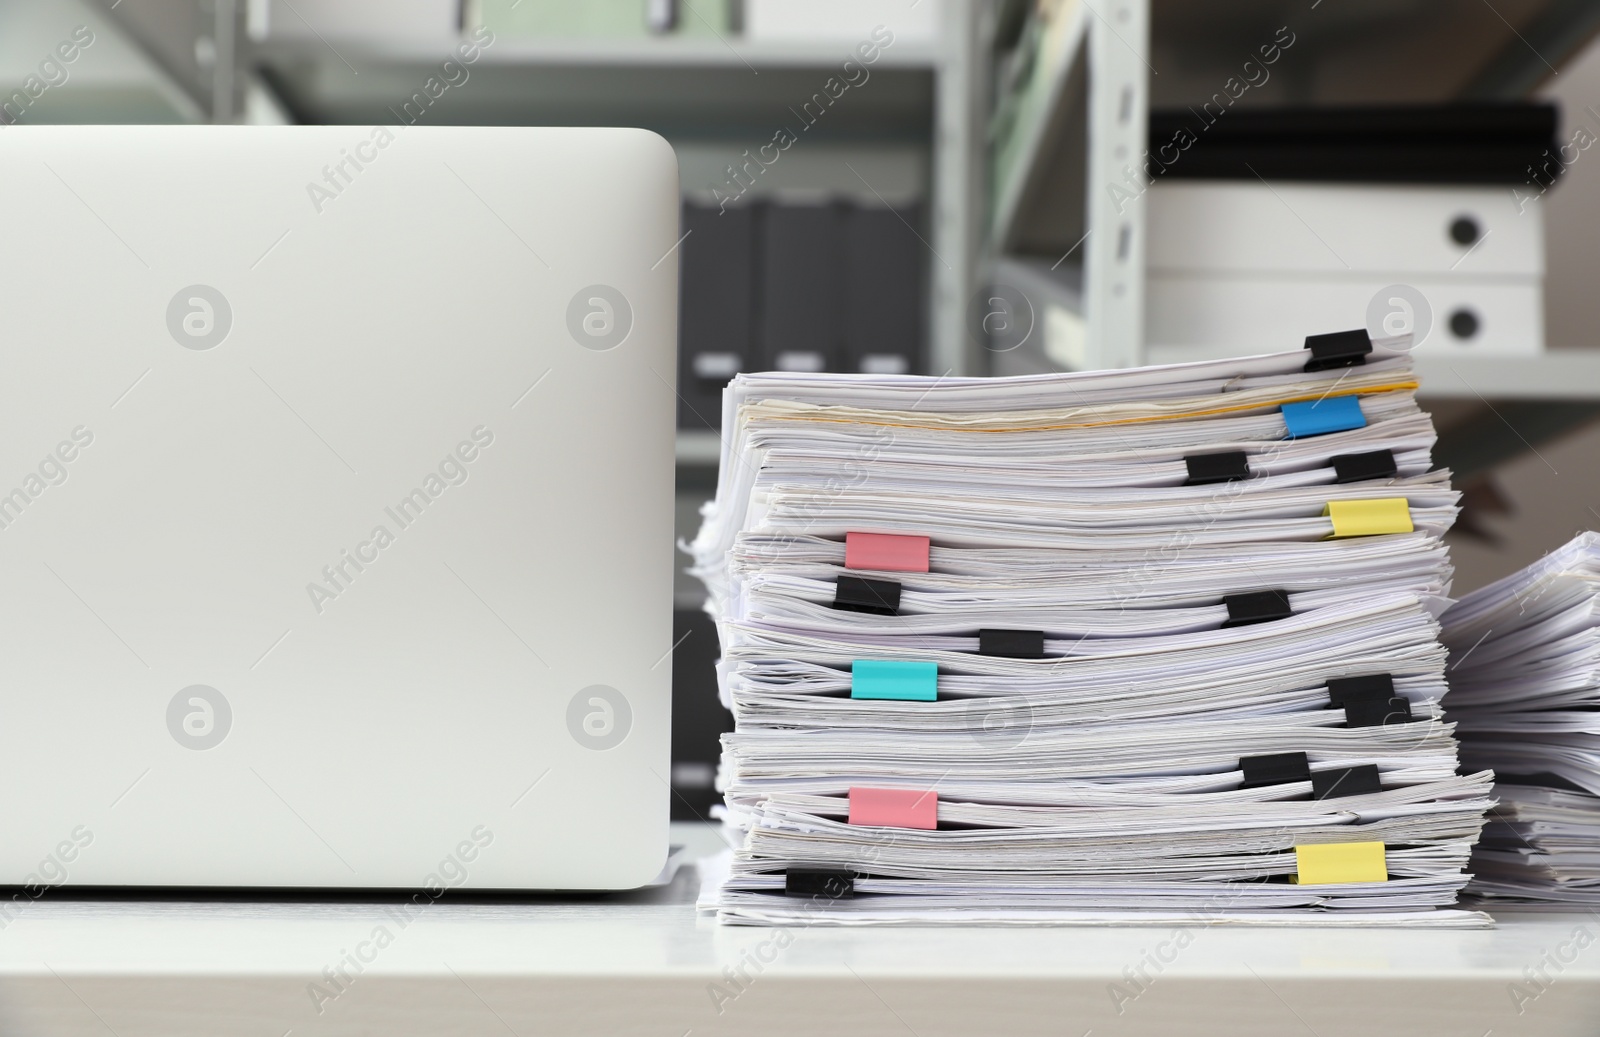 Photo of Laptop and documents on desk in office